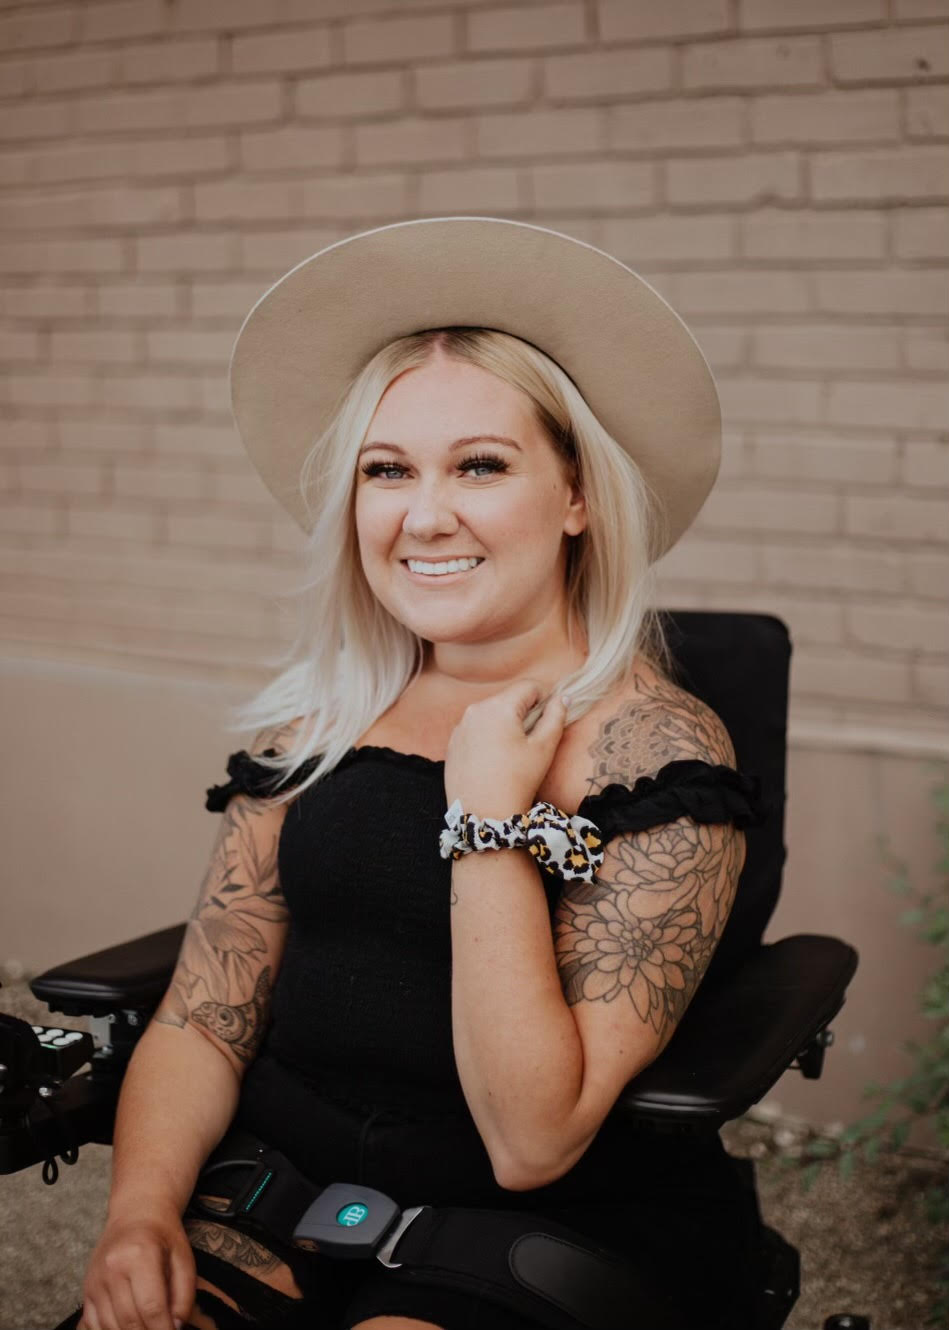 Bio photo of Shailynn Taylor. She is sitting on her wheelchair, has several arm tattoos and wearing a wide brim hat.